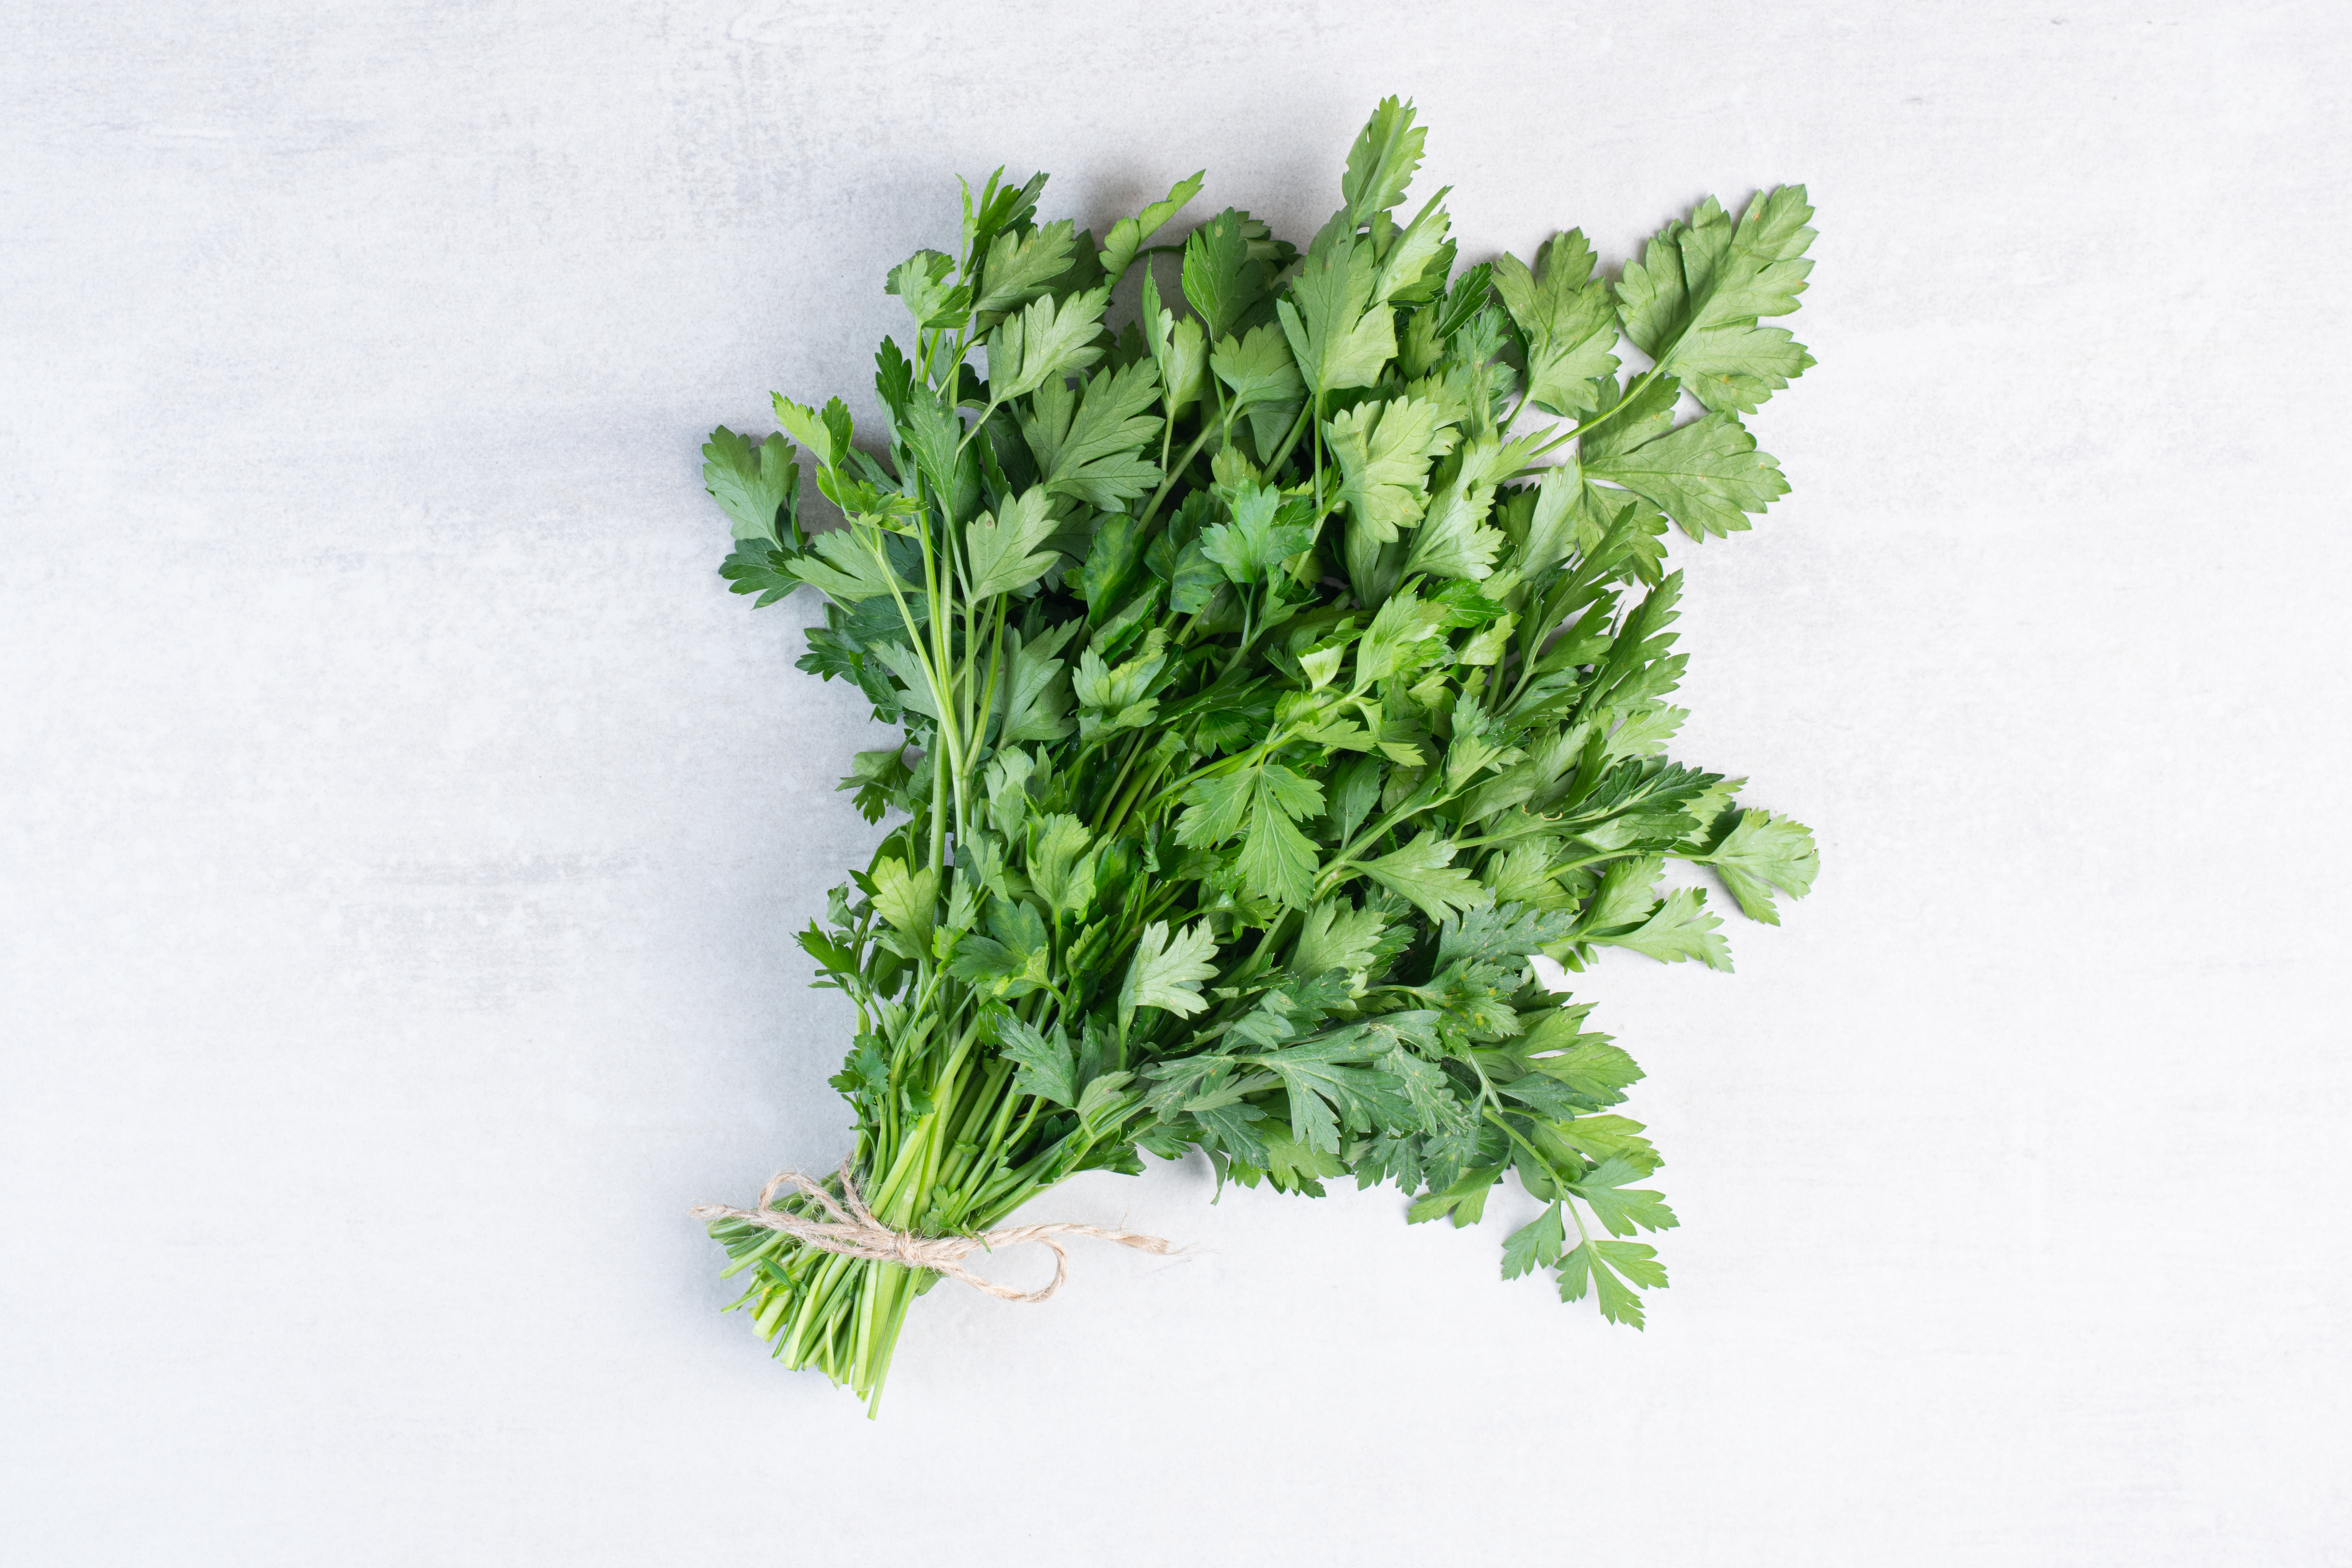 bunch-fresh-coriander-leaves-stone-surface-high-quality-photo